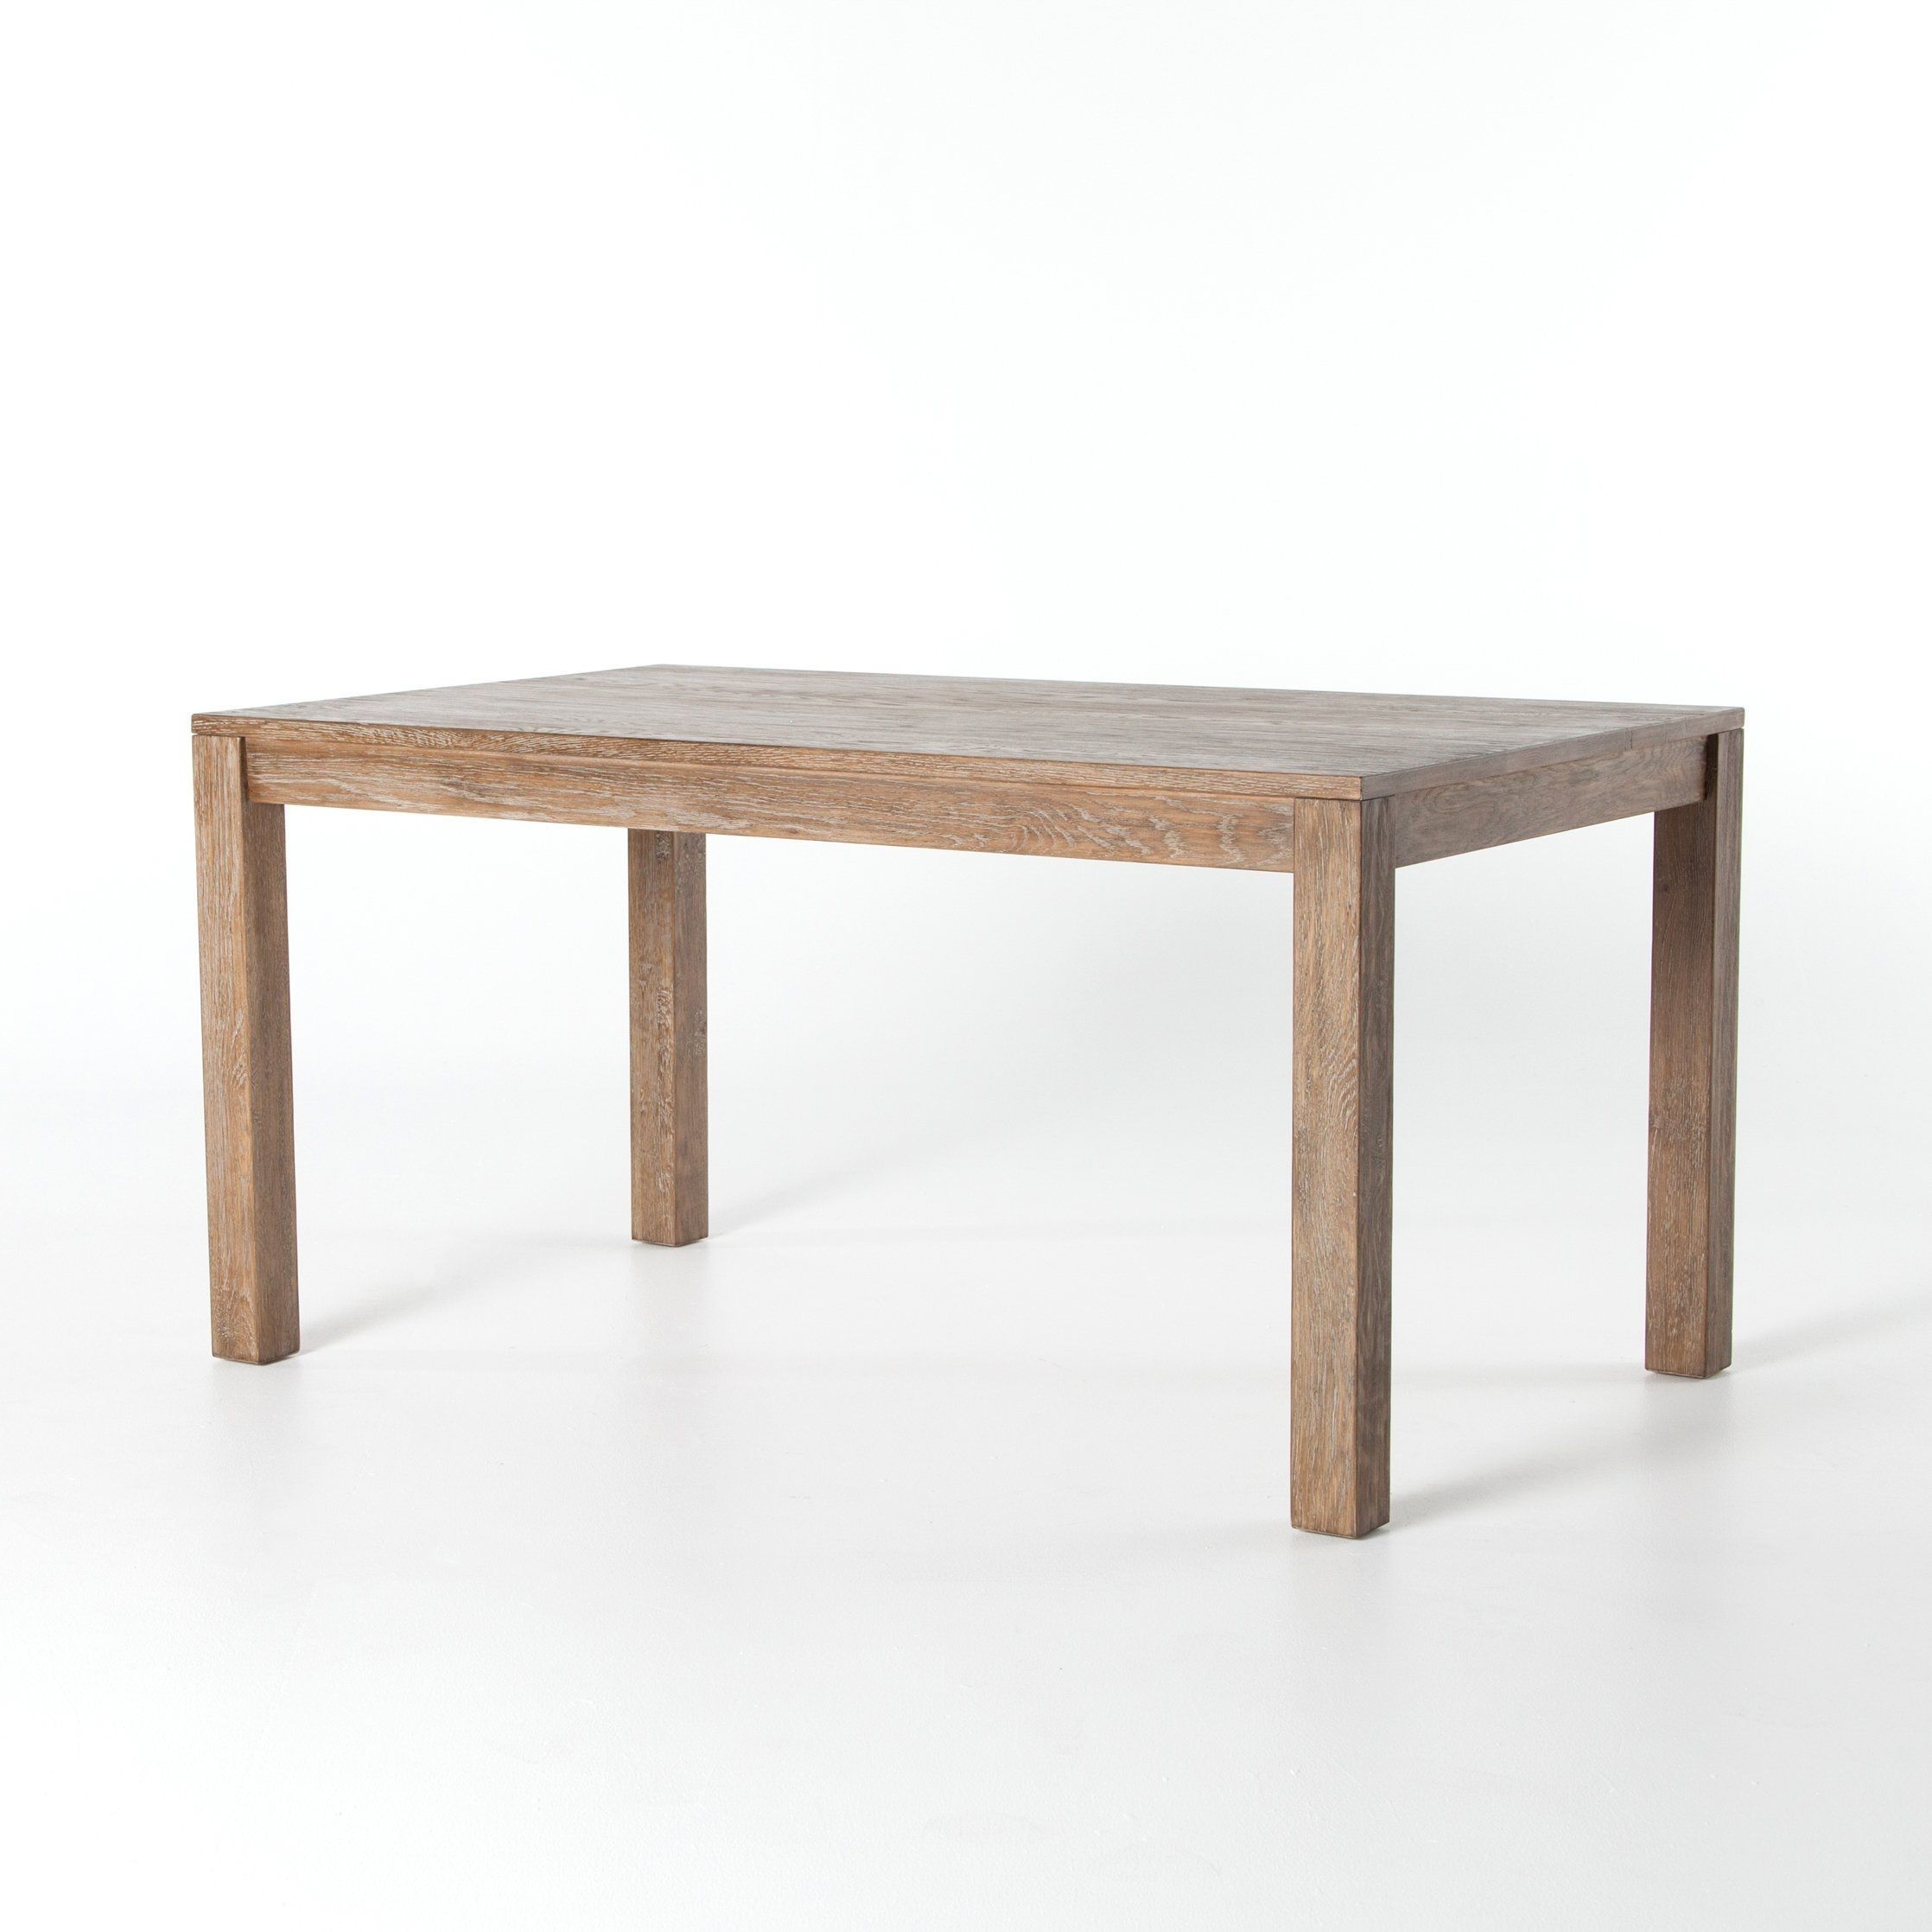 Caden Dining Table: Light Burnt Oak | Dining Table Lighting And Products In Most Recently Released Caden Round Dining Tables (View 15 of 20)